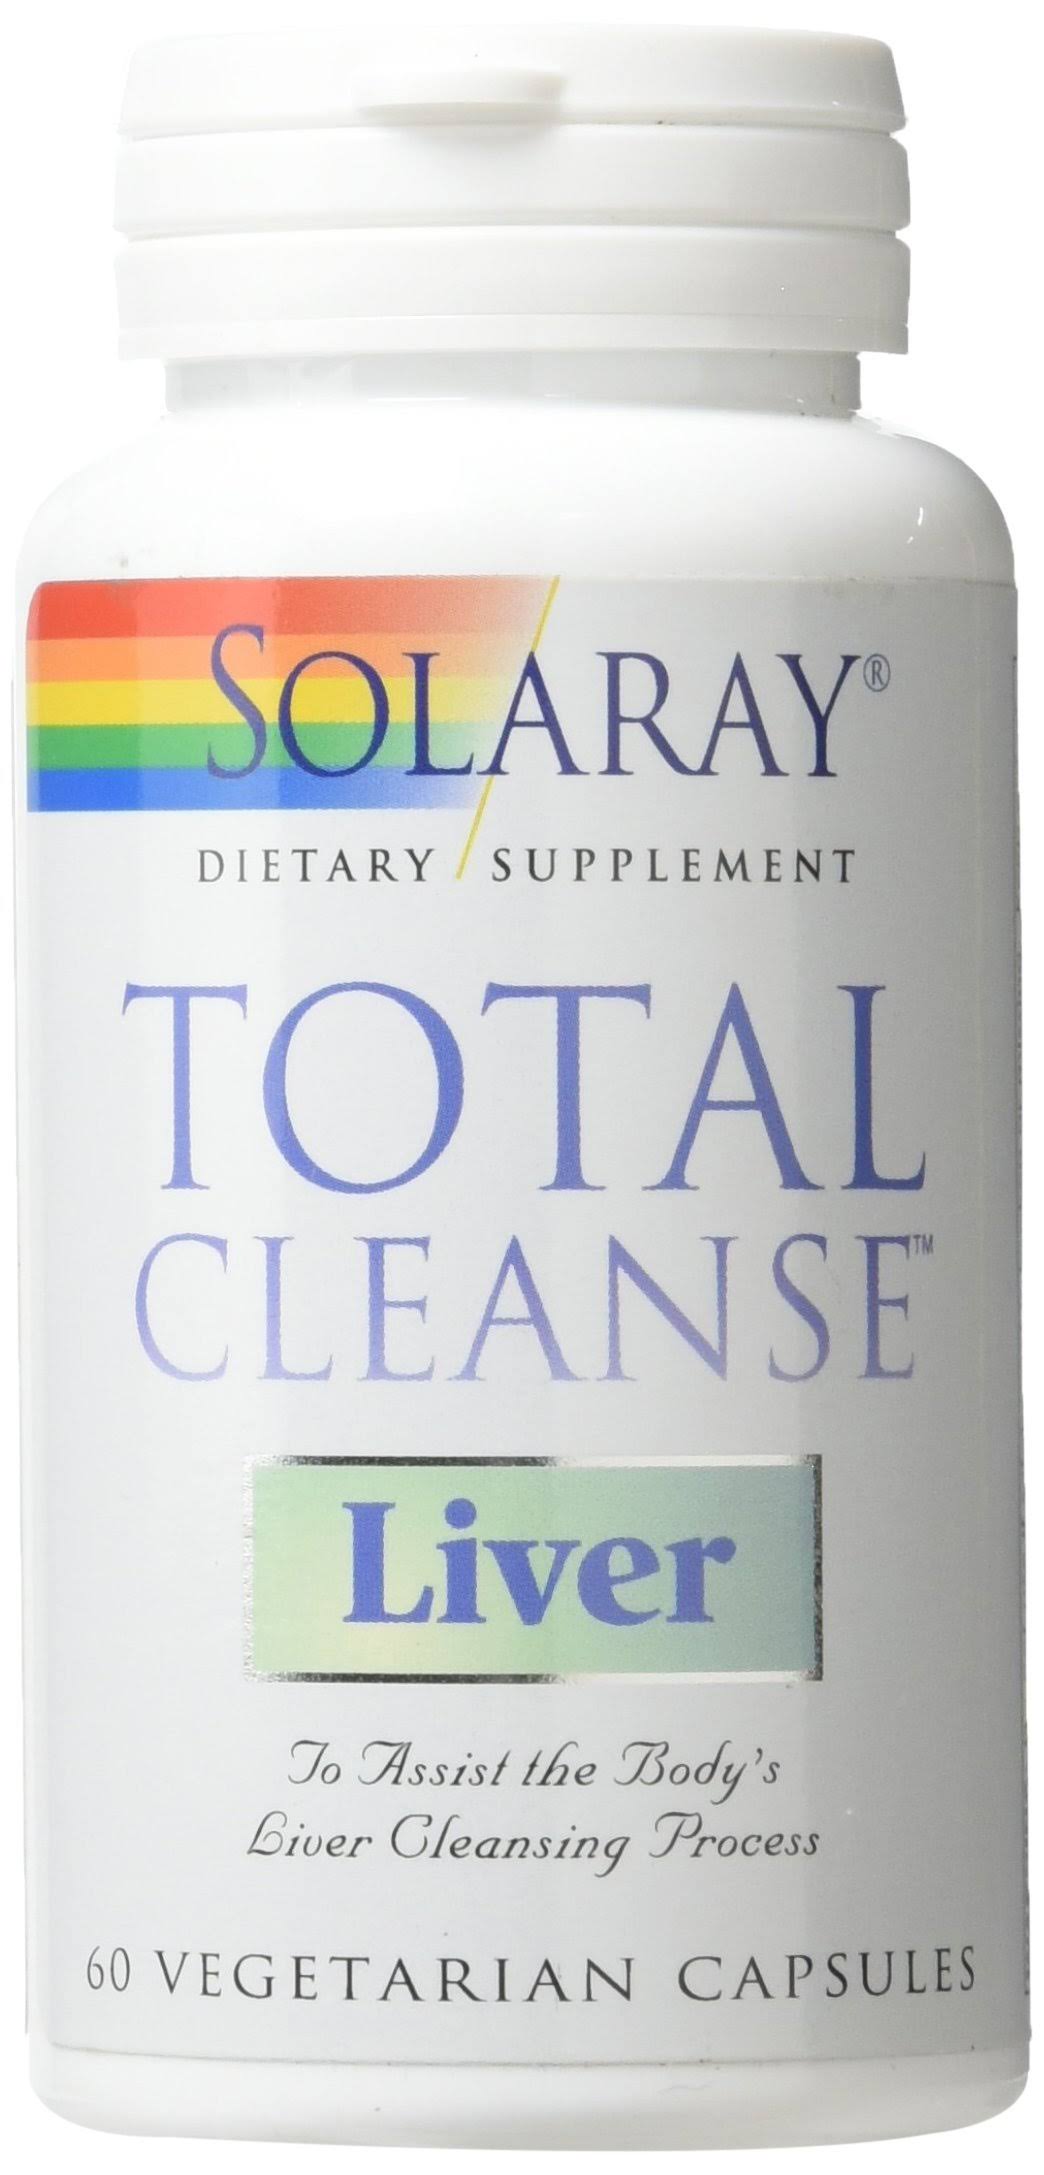 Solaray Total Cleanse Liver - 60 VCapsules